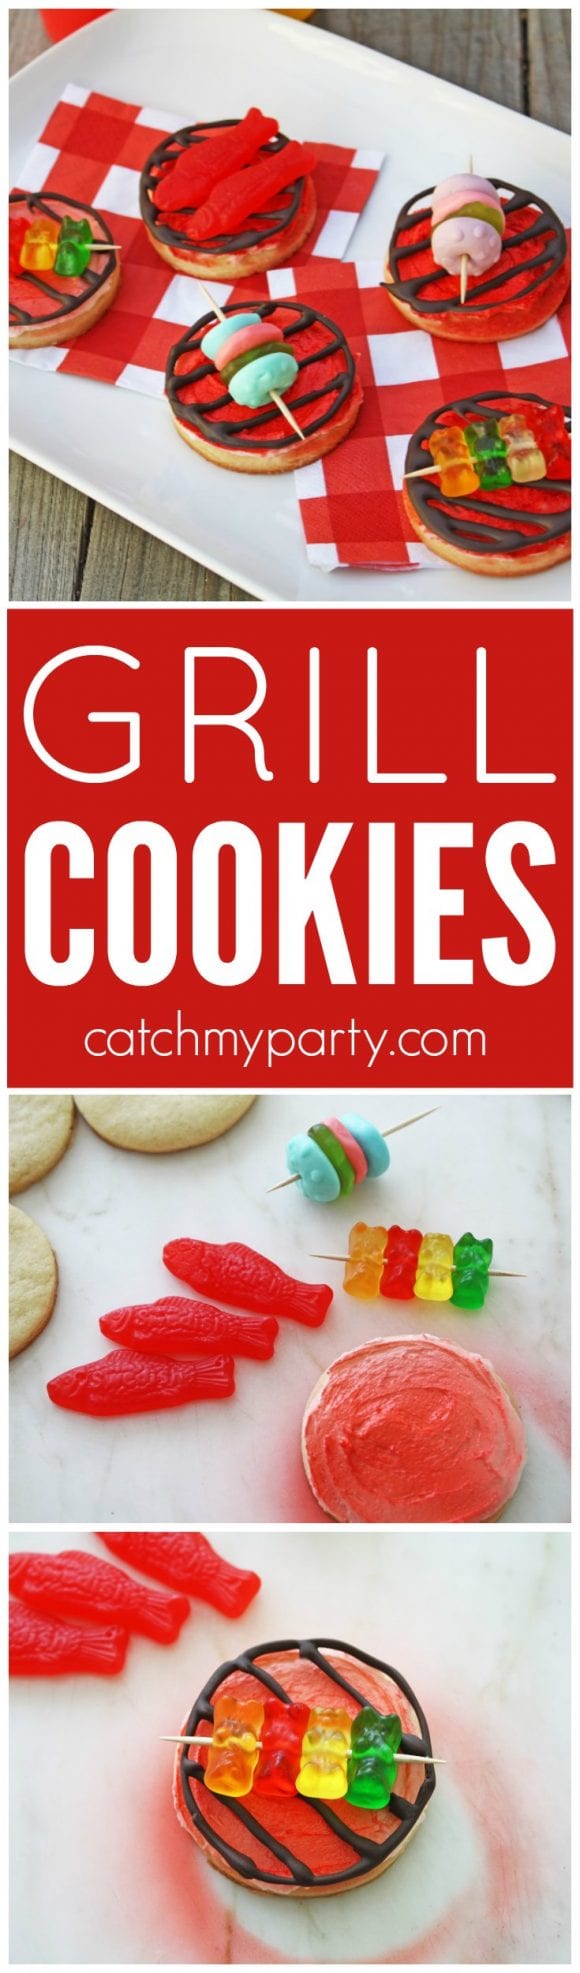 Grill cookies | Catchmyparty.com